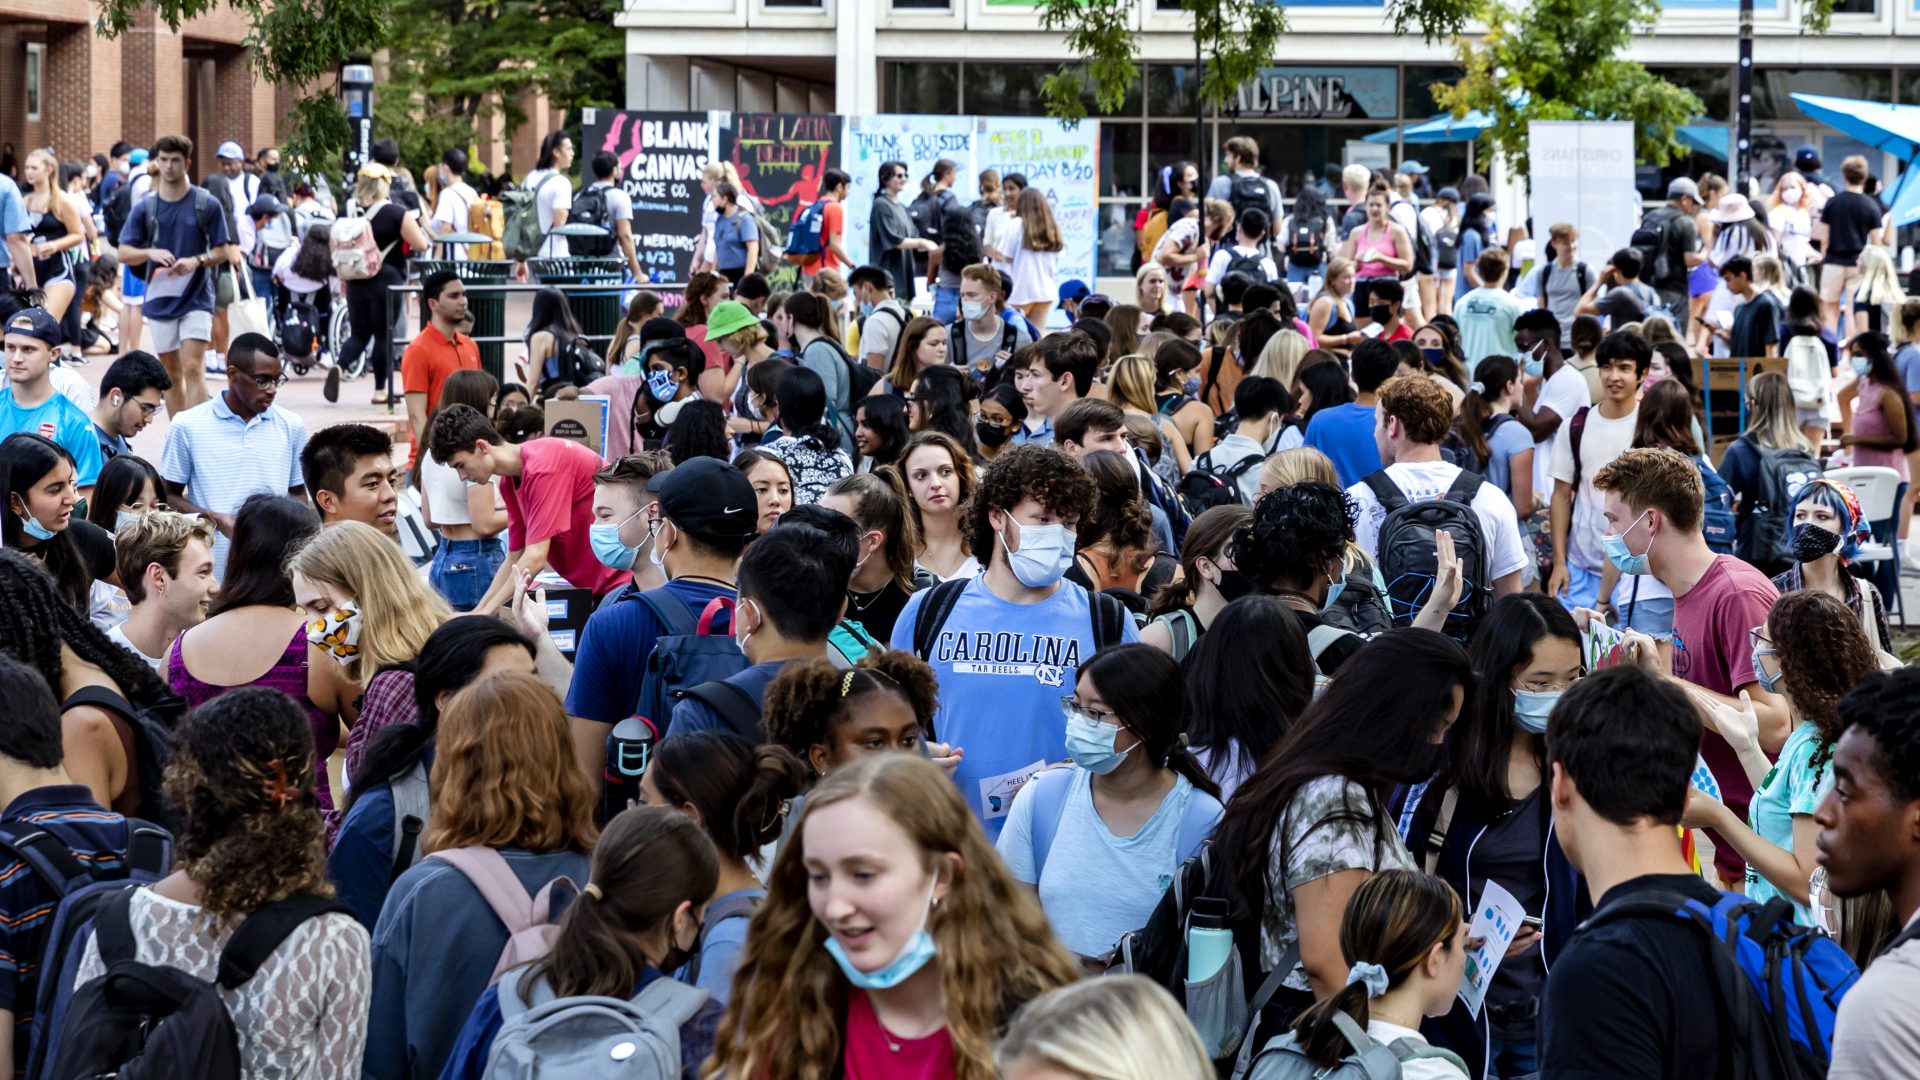 UNC campus scene. Students meet in front of the bookstore in large groups. Multiple are seen wearing masks.